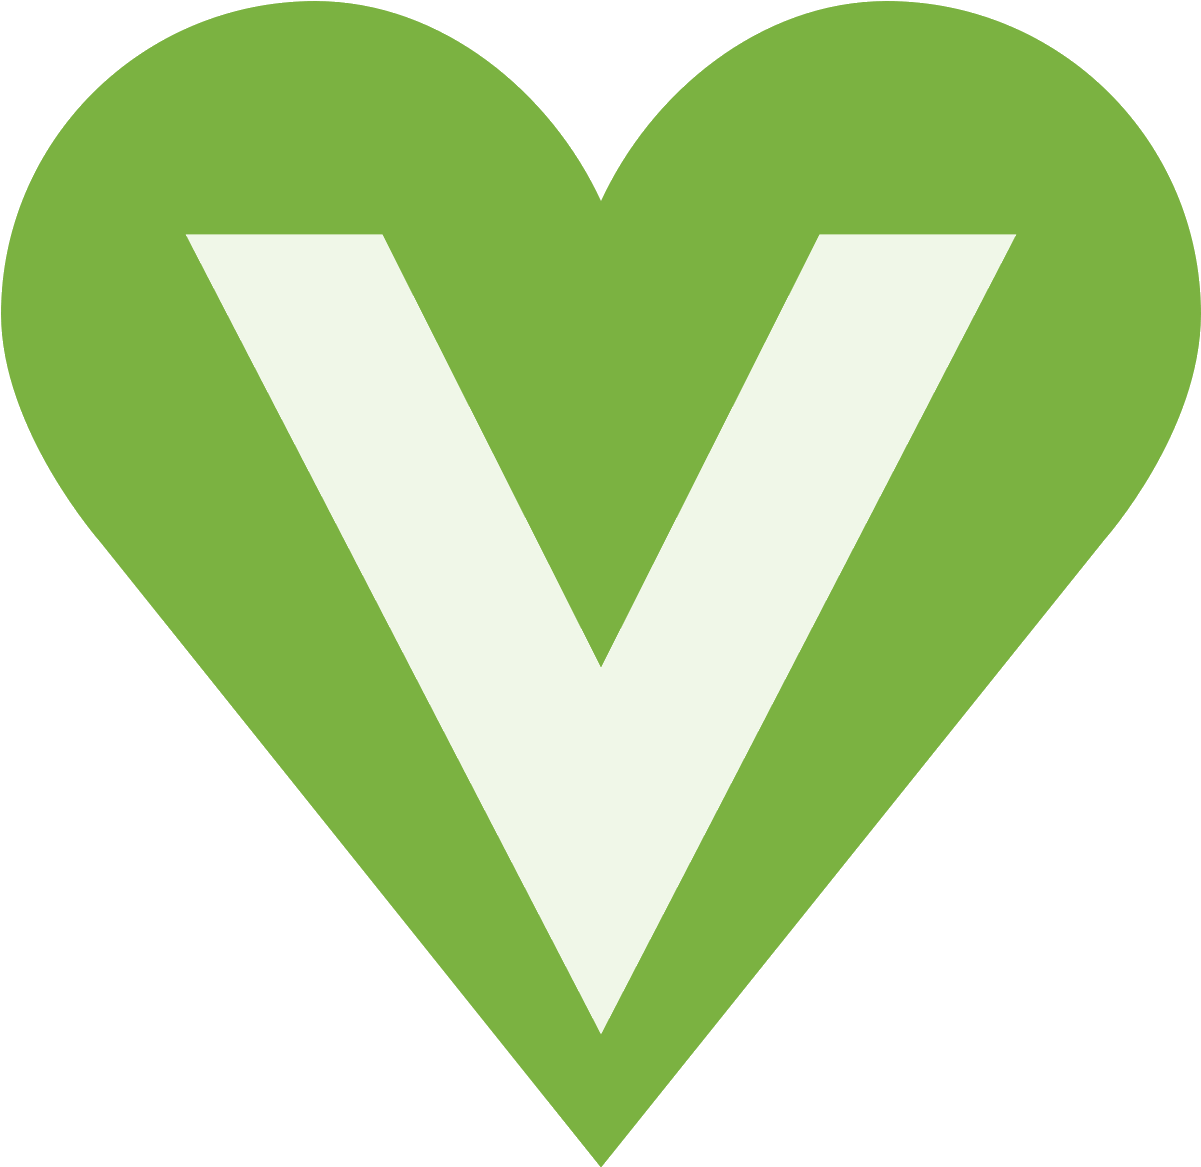 A Green Heart With A White V In It